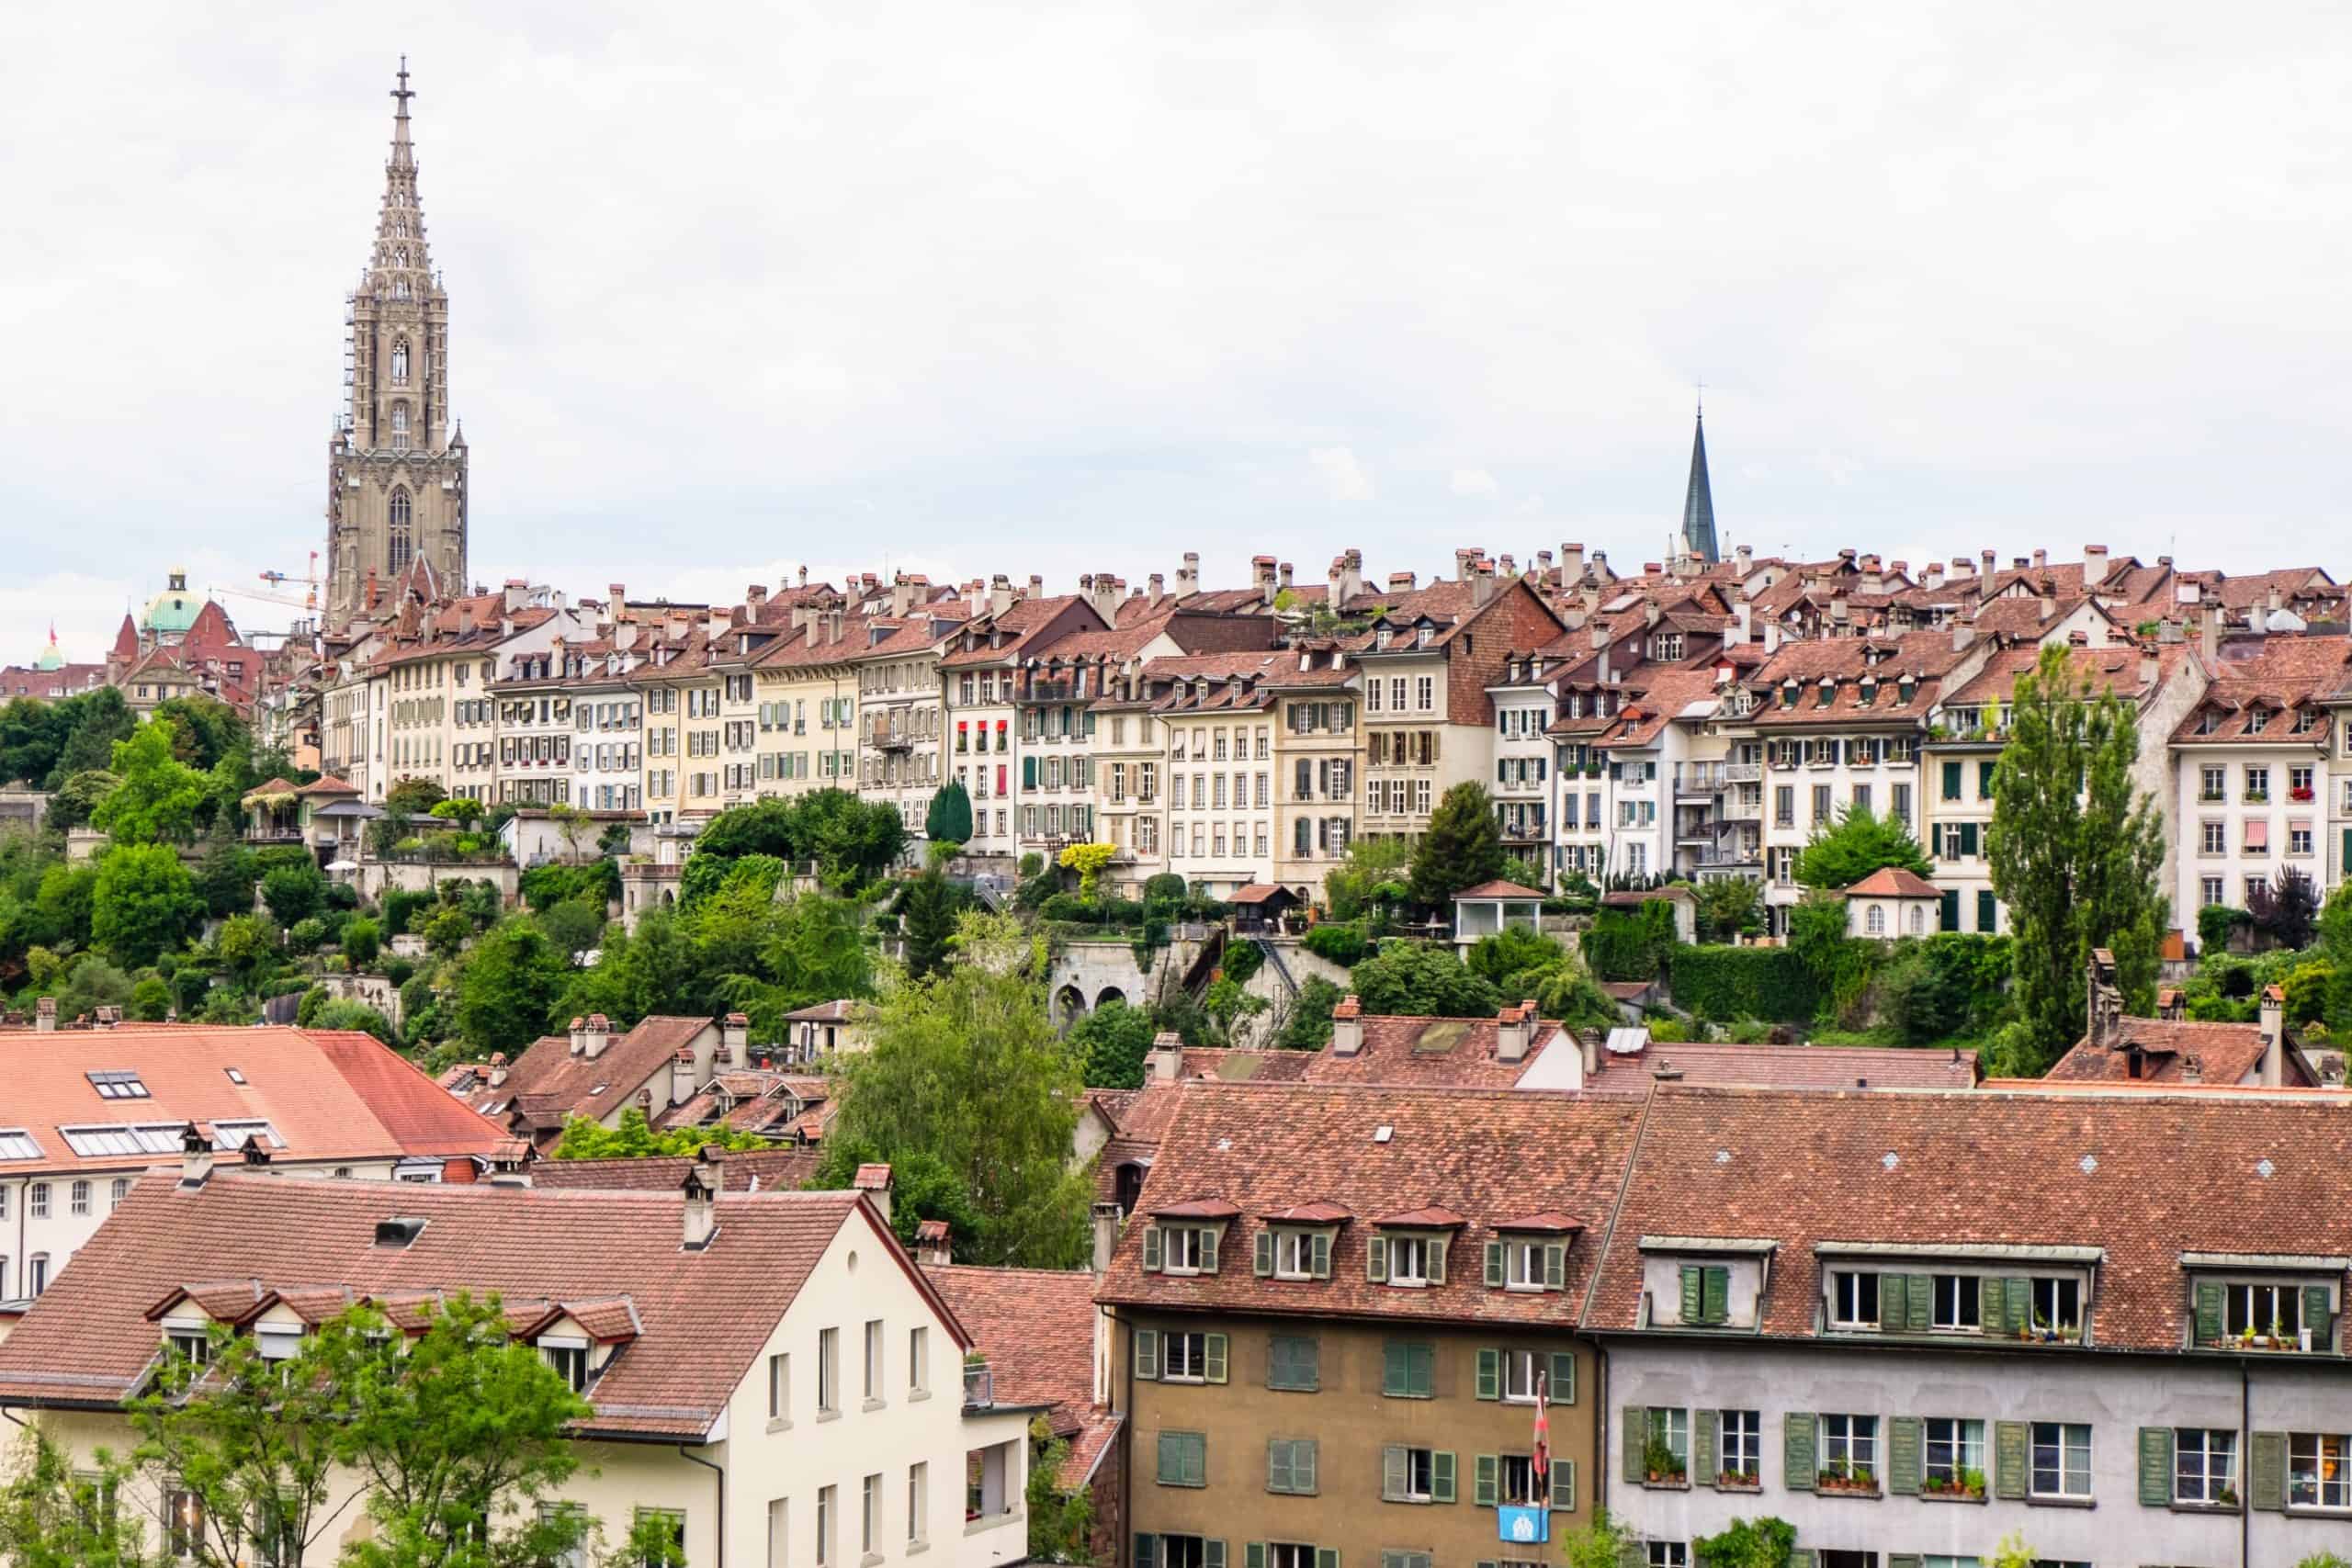 The famous red rooftops of the old city of Bern, Switzerland marked by the high church spire